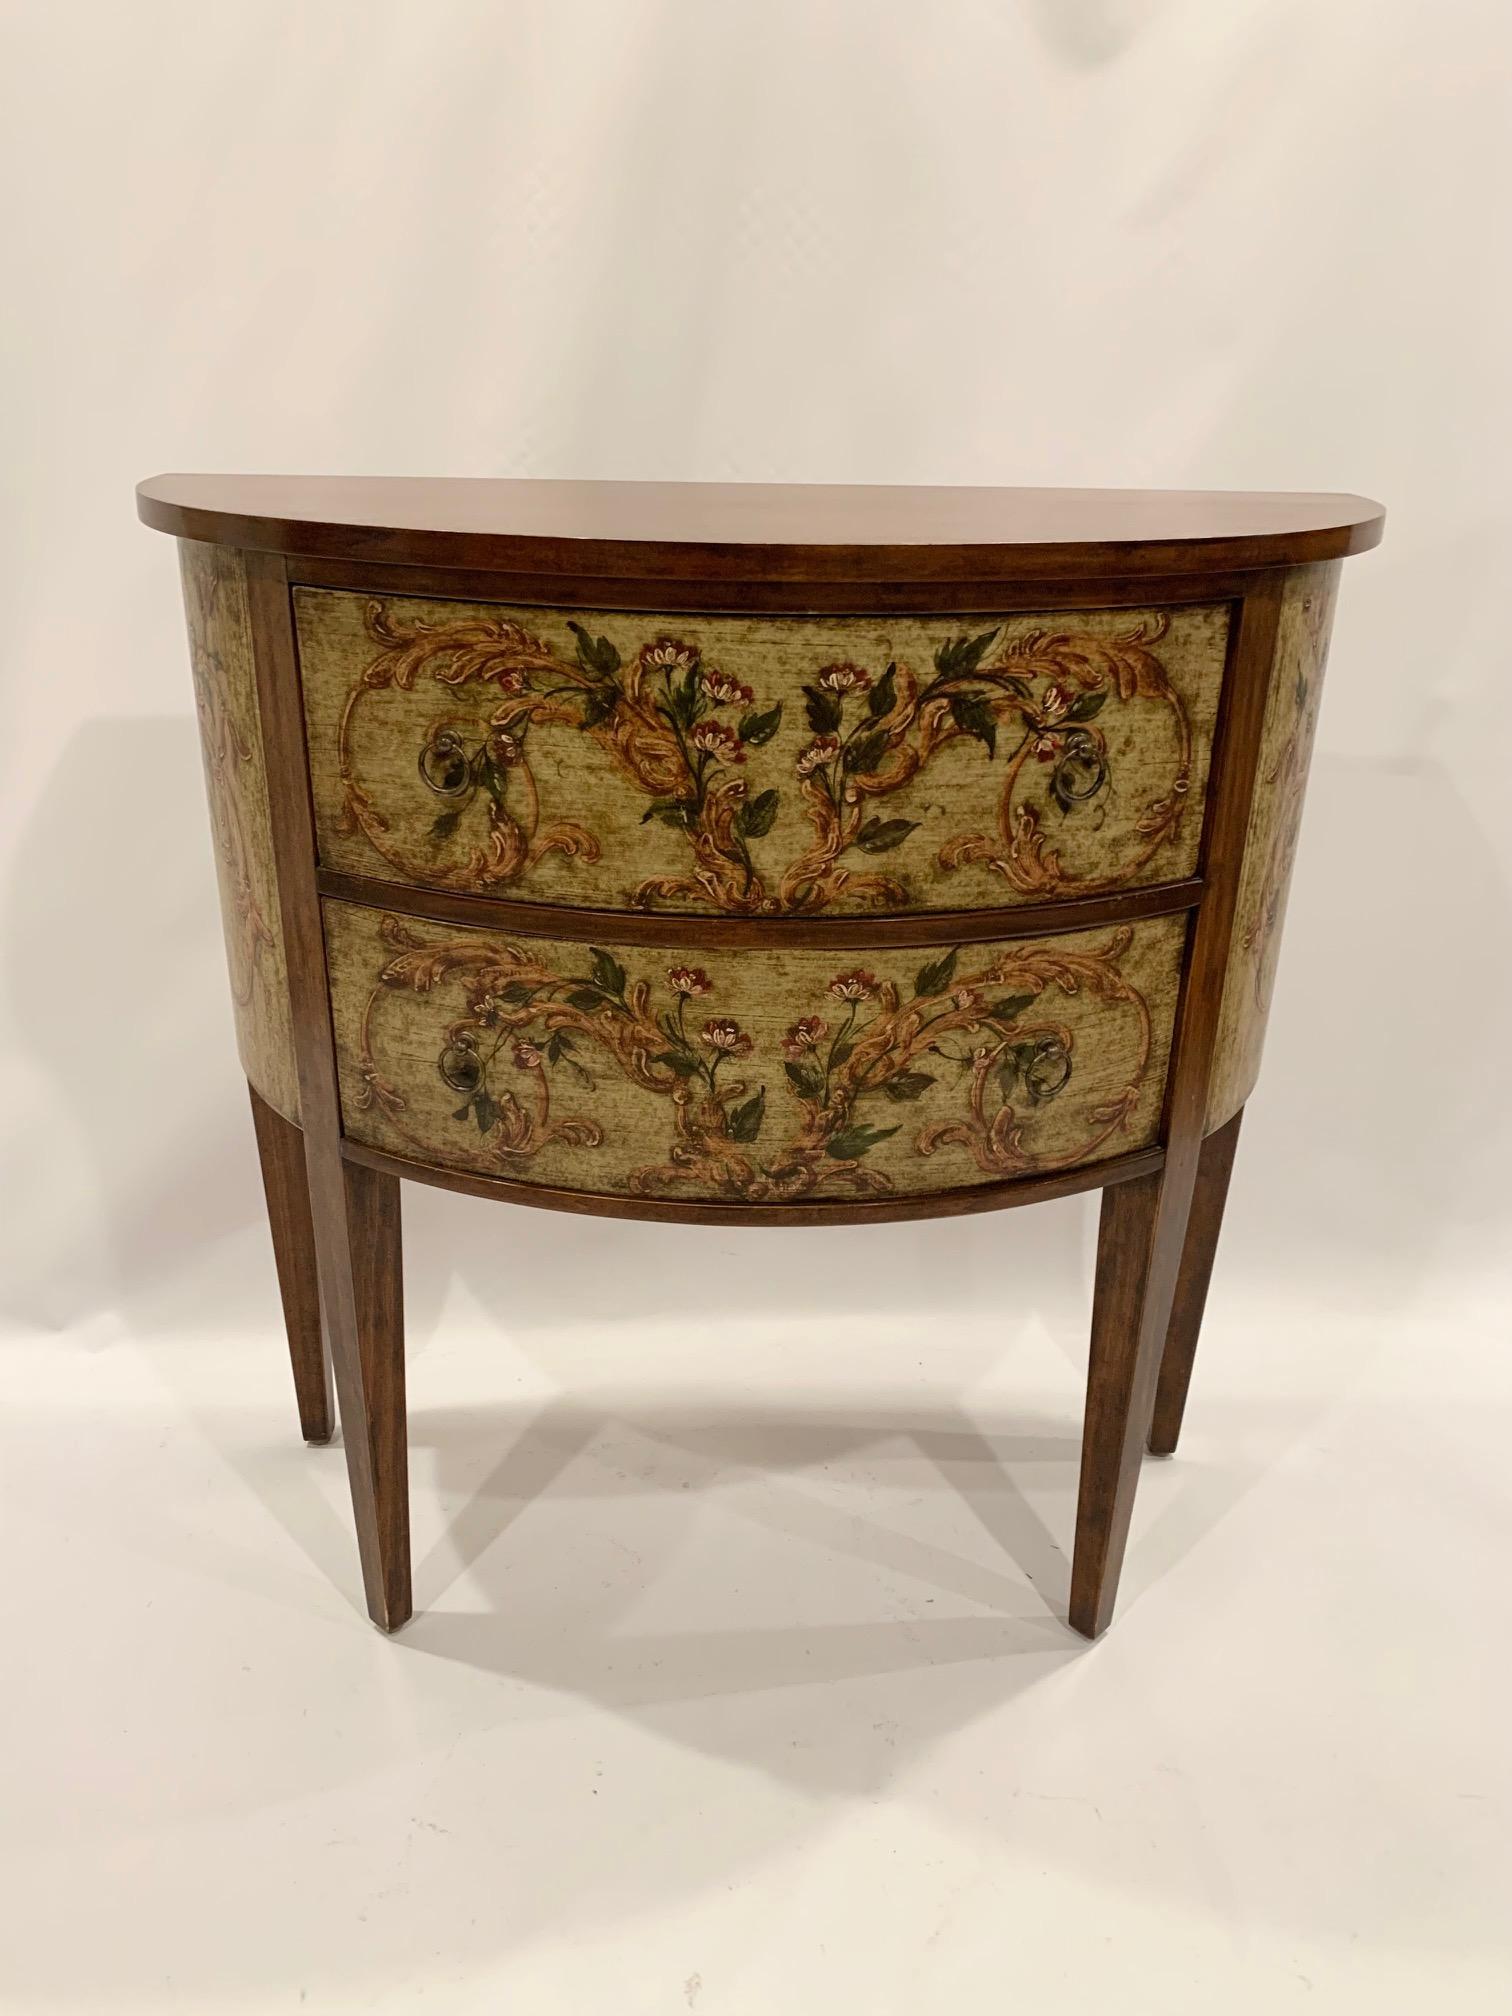 Very pretty Italian demilune table having rich fruitwood top and painted body with 2 drawers. The decorative painting has an antiqued cream finish with earth colored floral motif. Some of the natural brown fruitwood is carried through in the